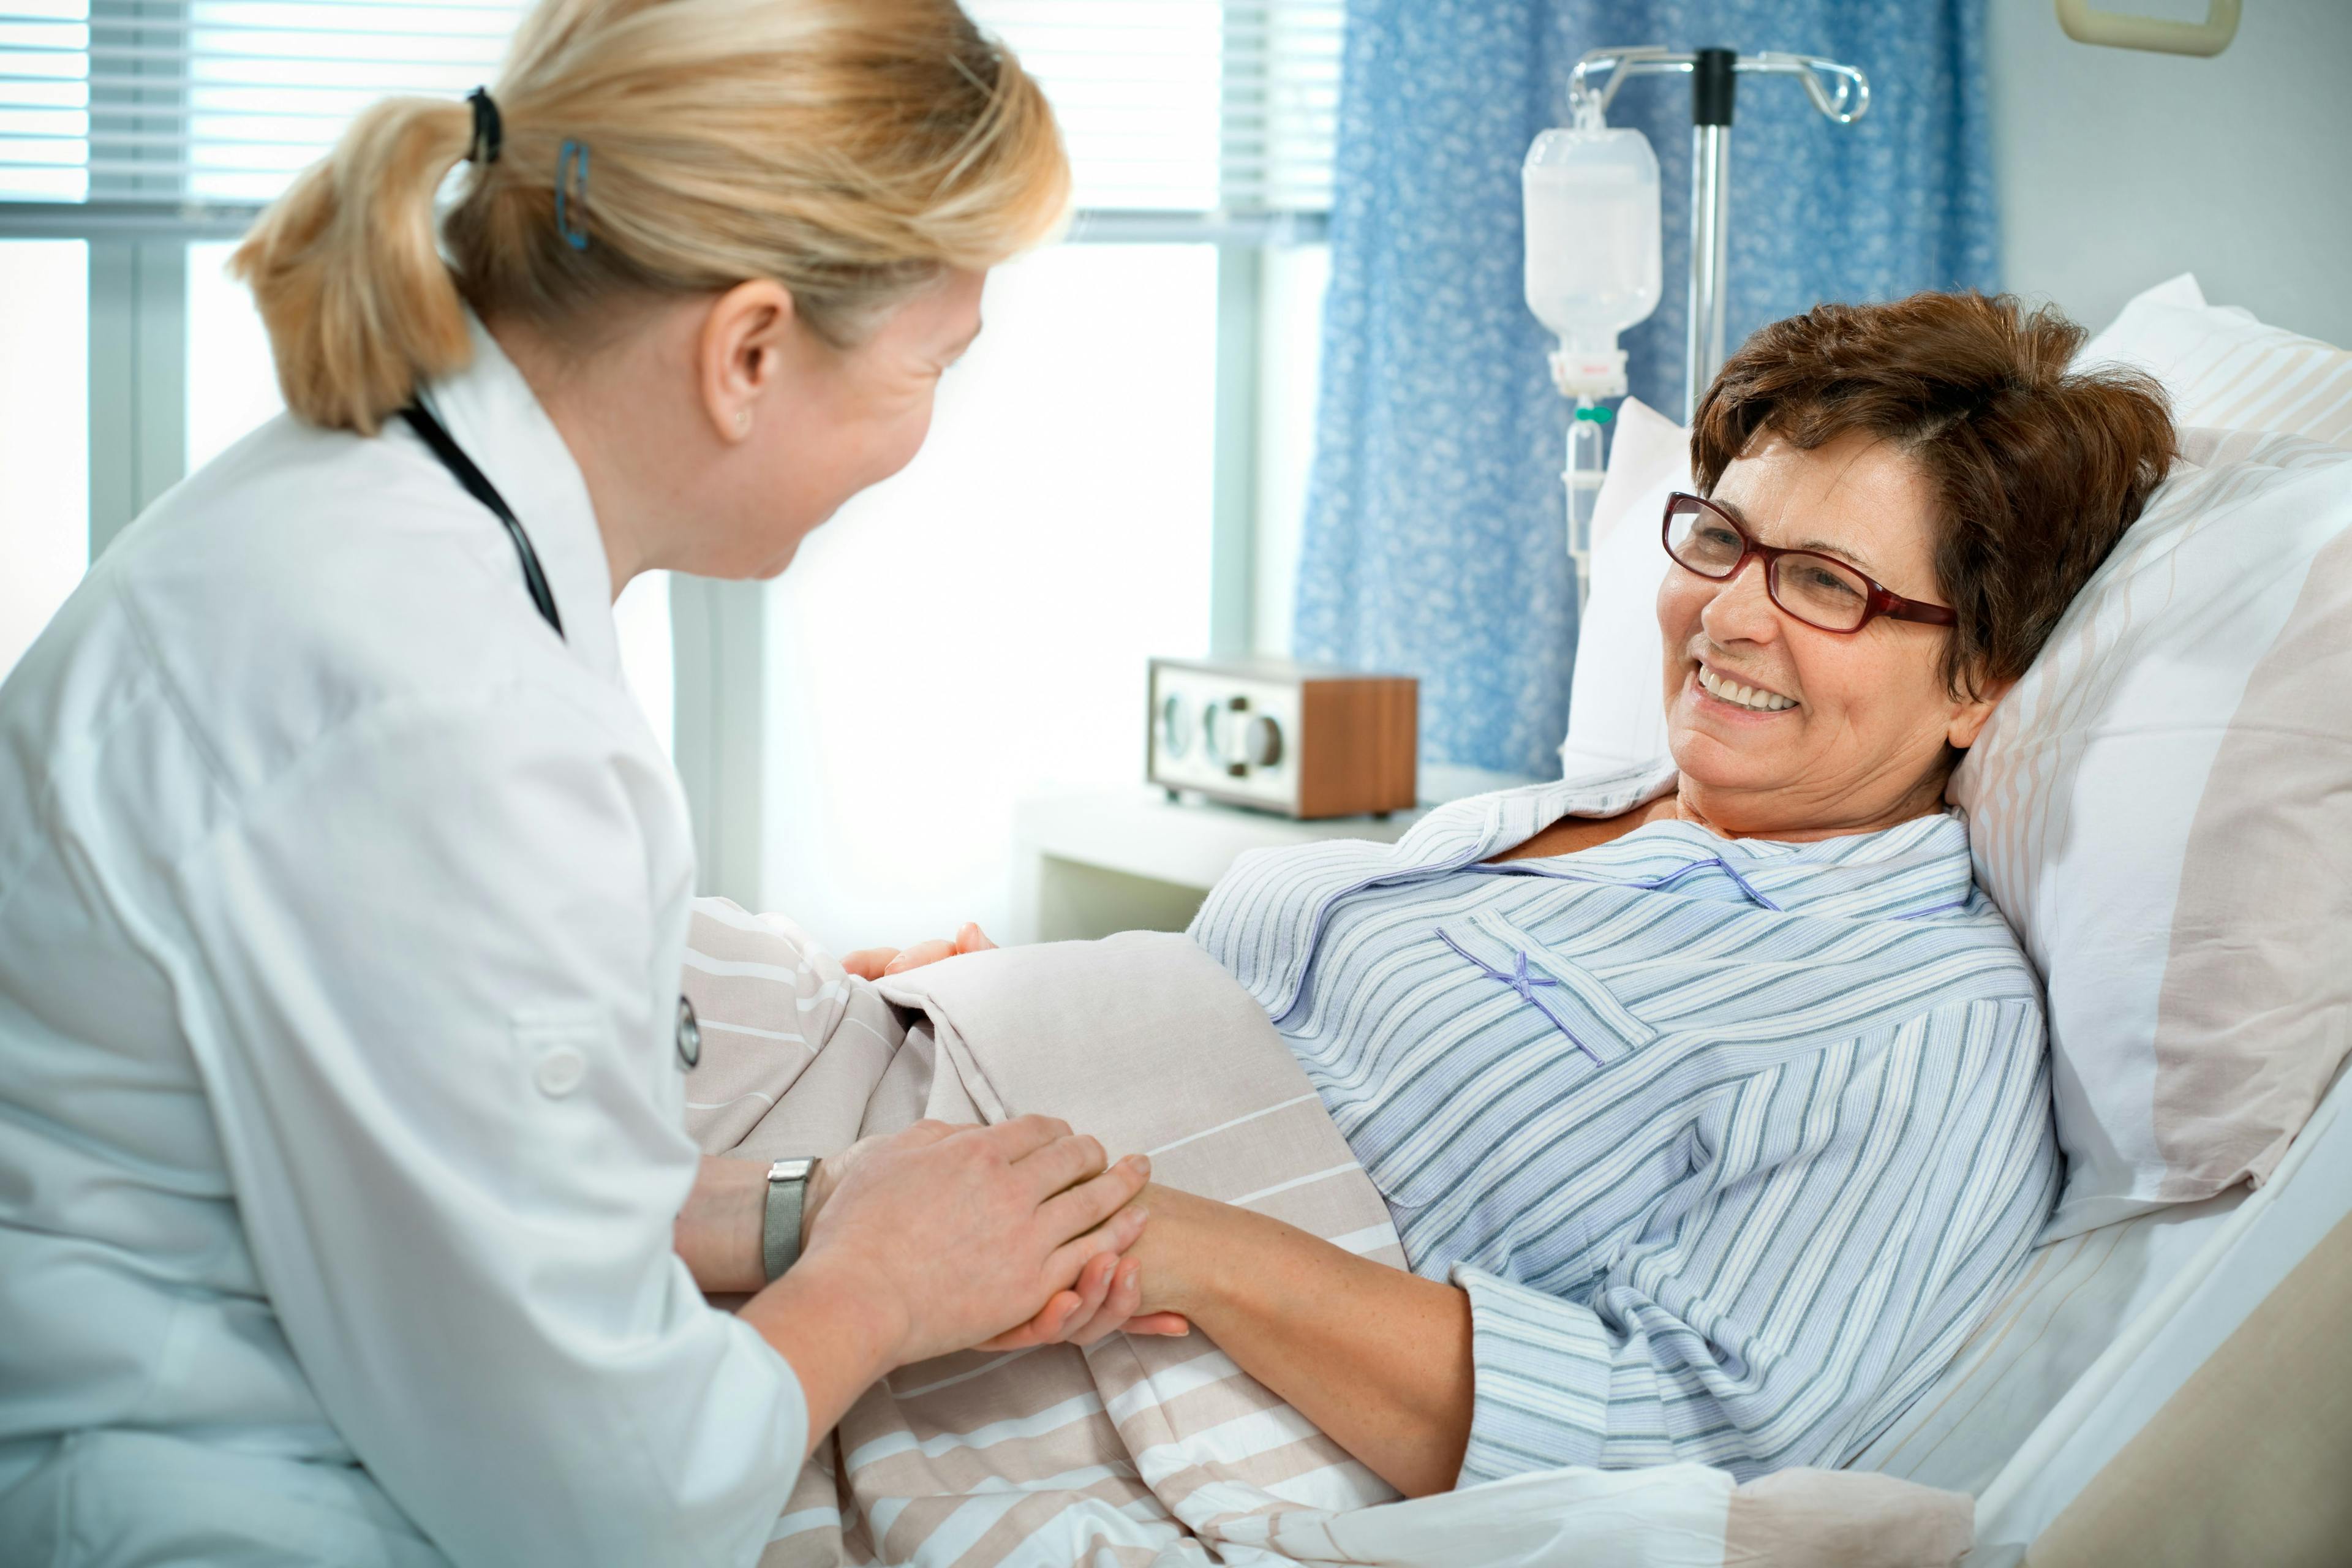 Carboplatin Alone May Negatively Impact Survival in Patients With Ovarian Cancer